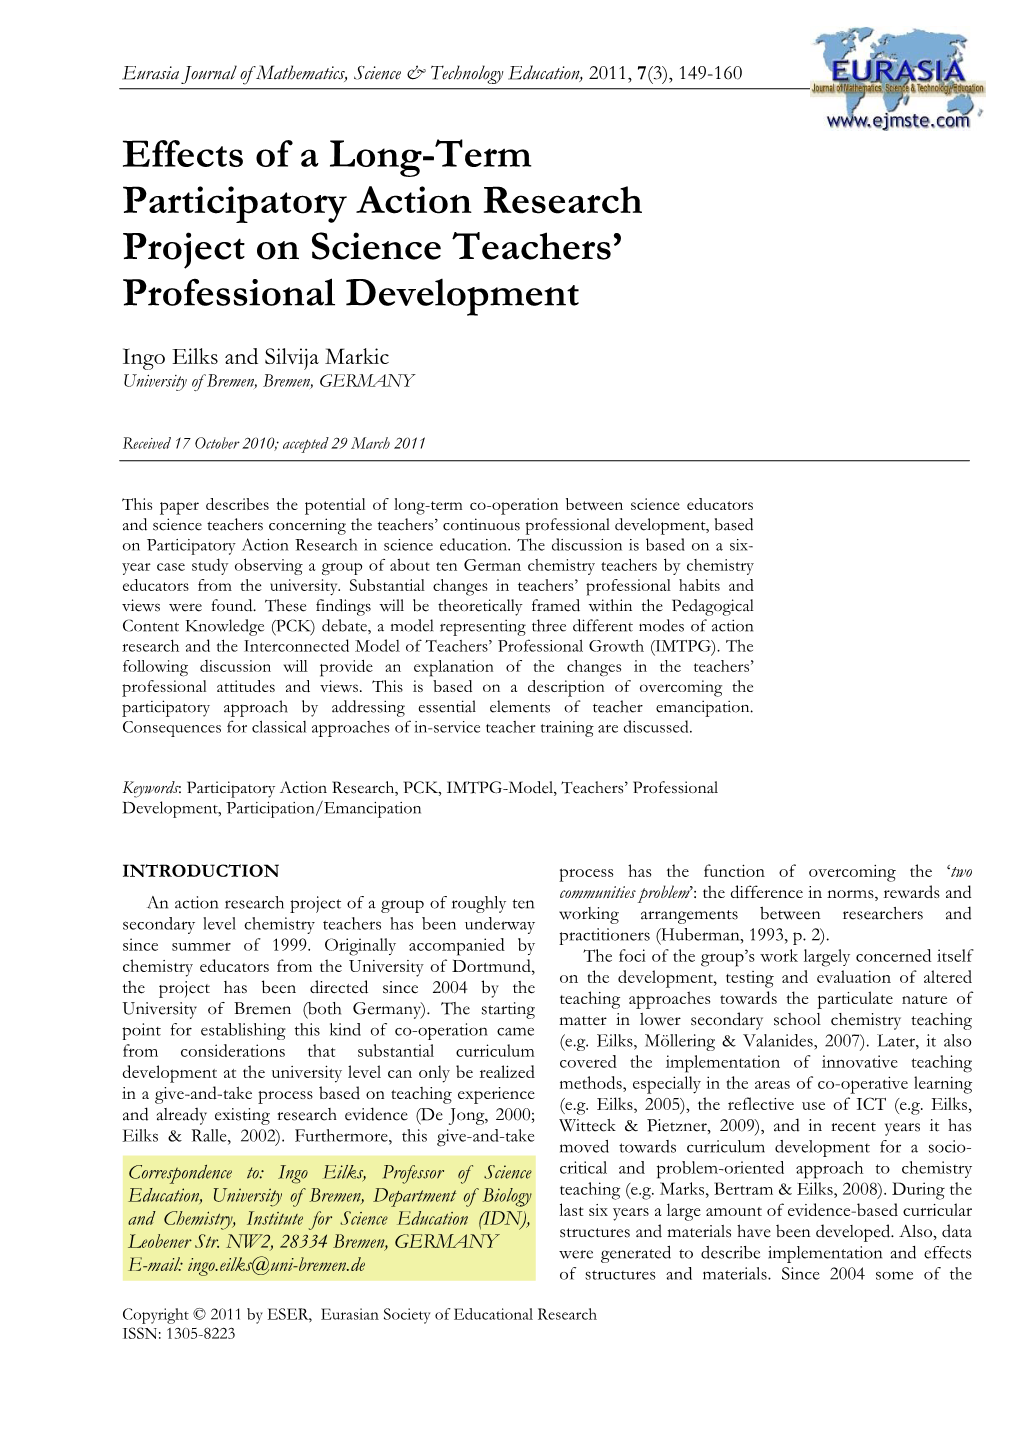 Effects of a Long-Term Participatory Action Research Project on Science Teachers’ Professional Development